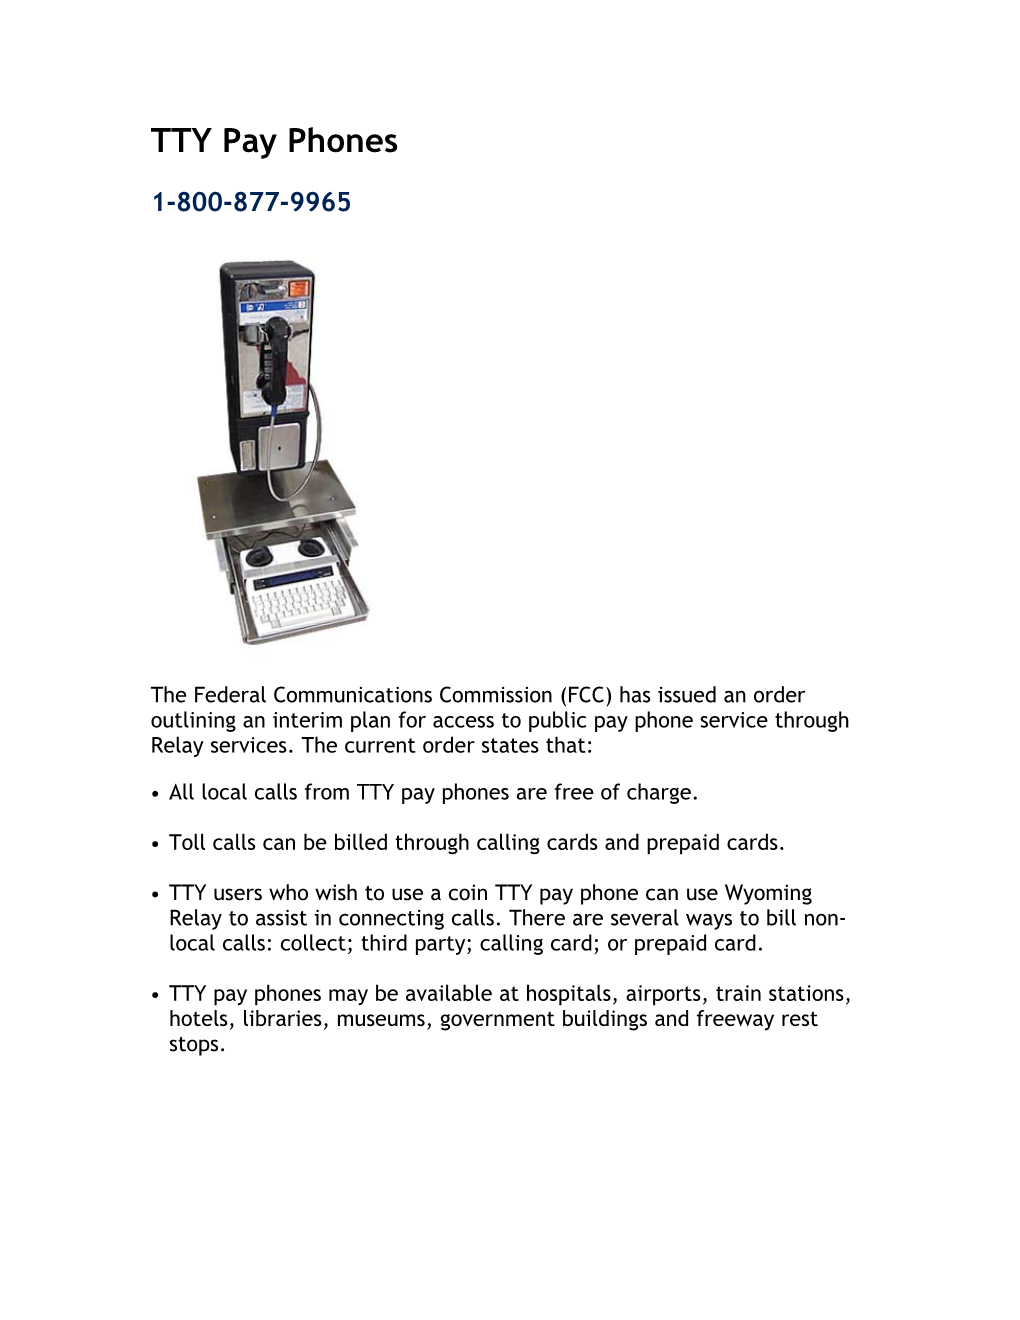 All Local Calls from TTY Pay Phones Are Free of Charge